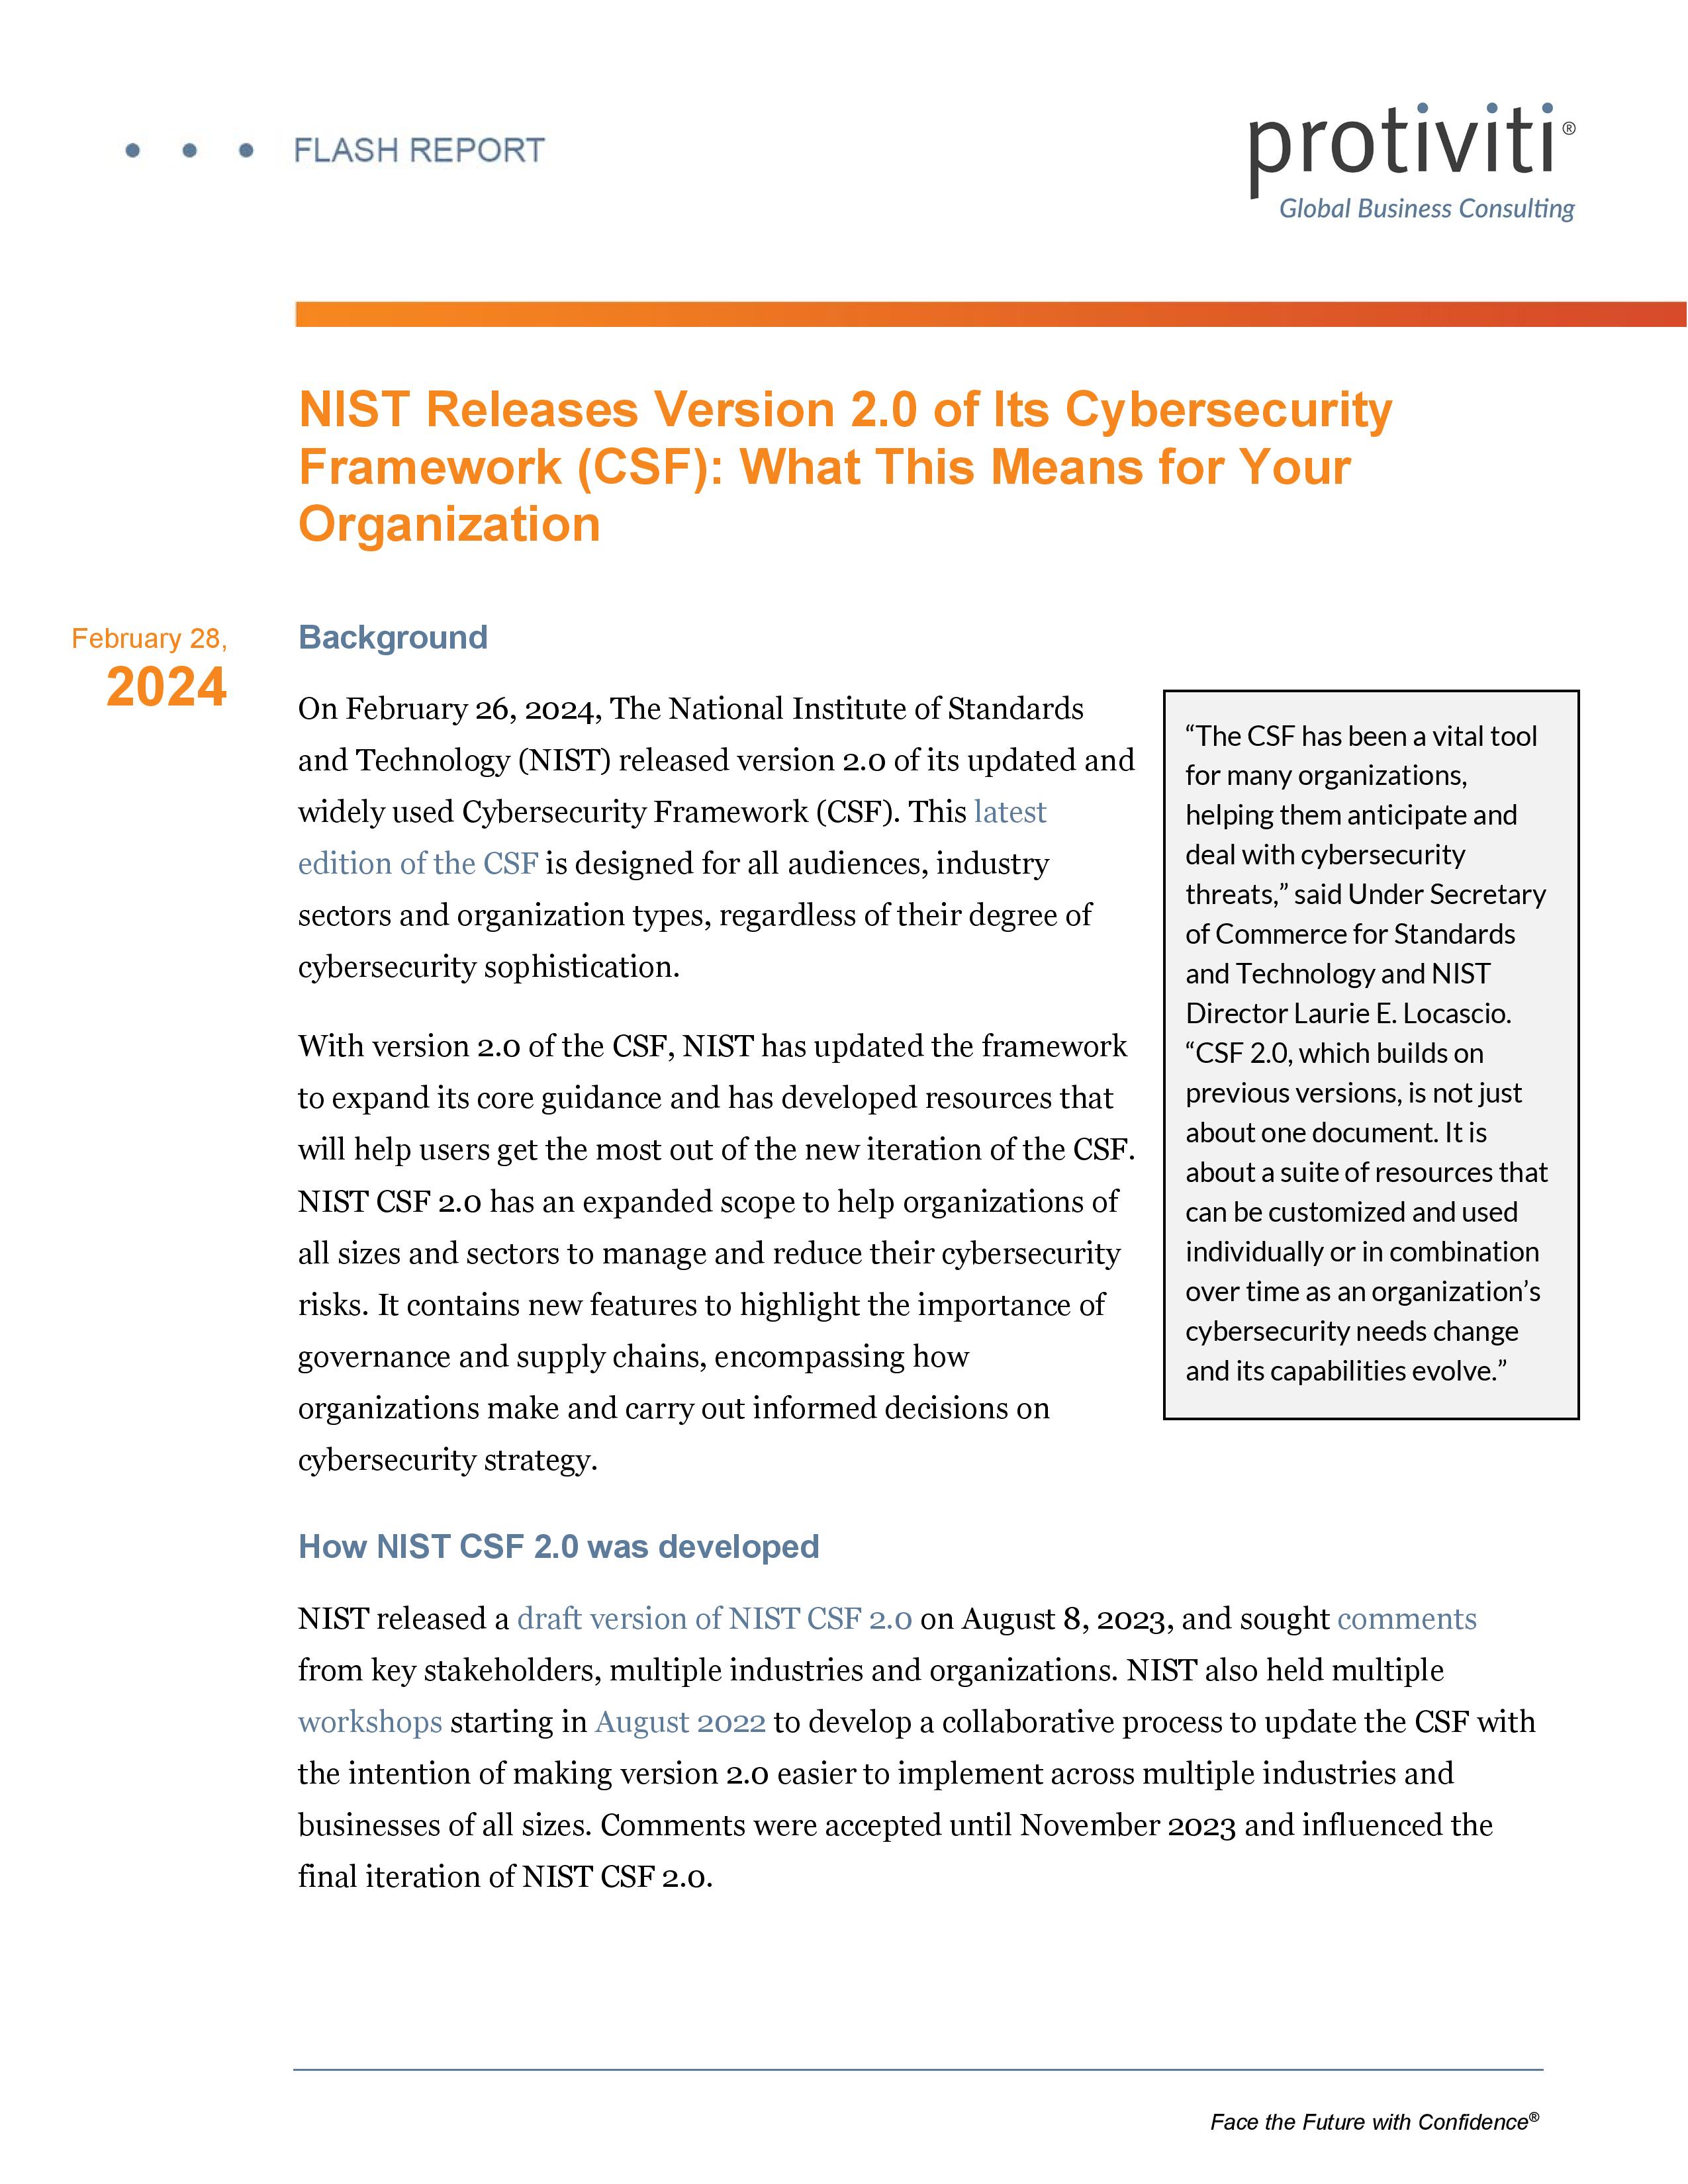 screenshot of the first page of NIST Releases Version 2.0 of Its Cybersecurity Framework (CSF) What This Means for Your Organization